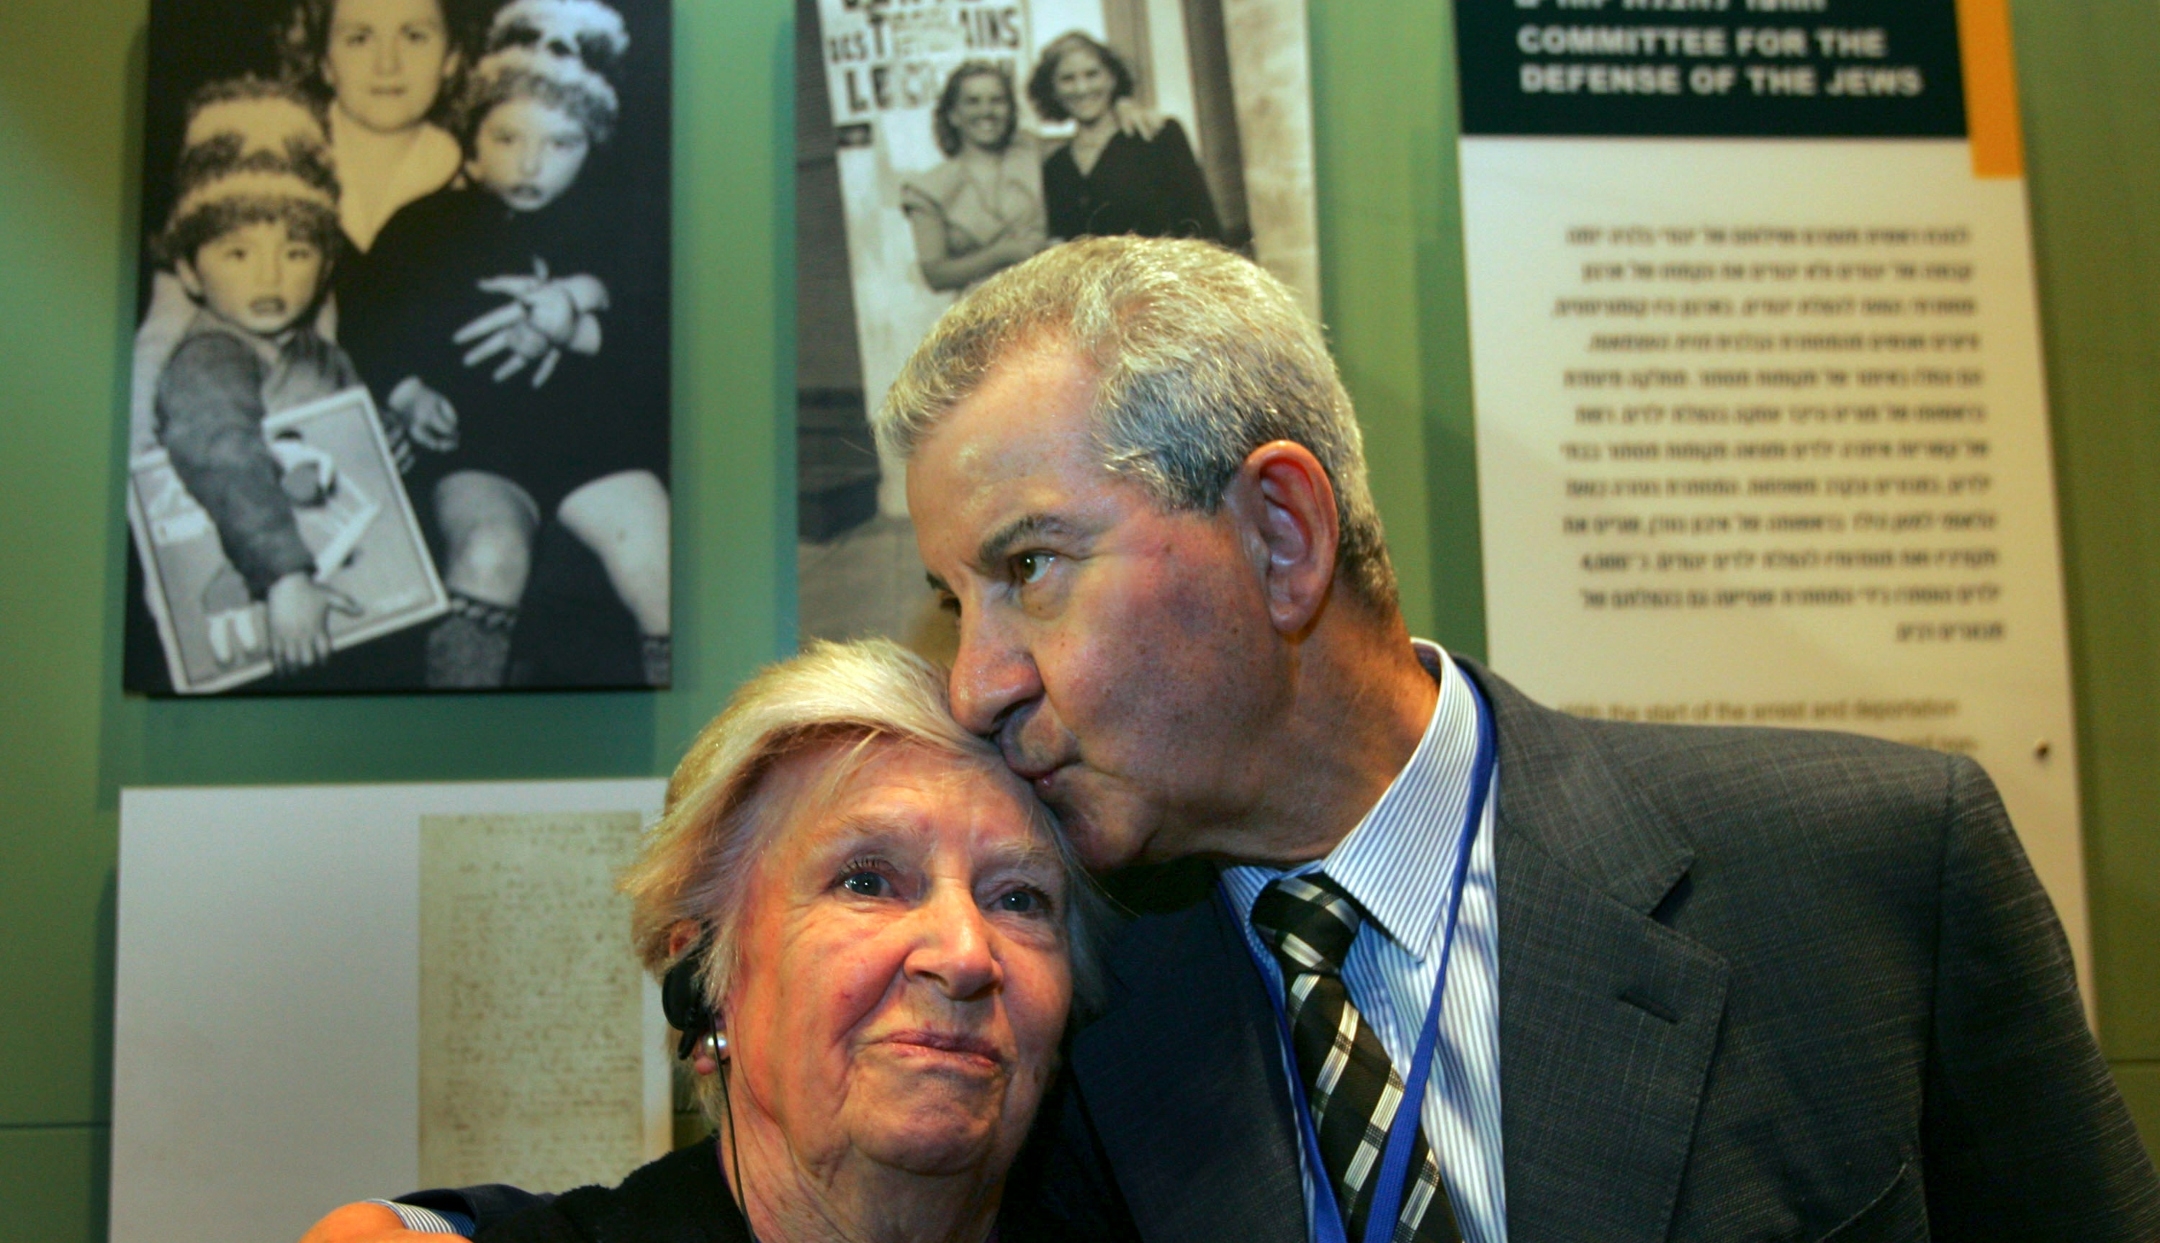 Andrée Geulen-Herscovici, a Belgian woman who rescued some 300 Jewish children from the Nazis during the Holocaust, is embraced by Henri Lederhandler, one of the children she rescued, in front of the exhibit on her efforts in the museum of the Yad Vashem Holocaust Memorial in Jerusalem, April 18, 2007. (David Silverman/Getty Images)